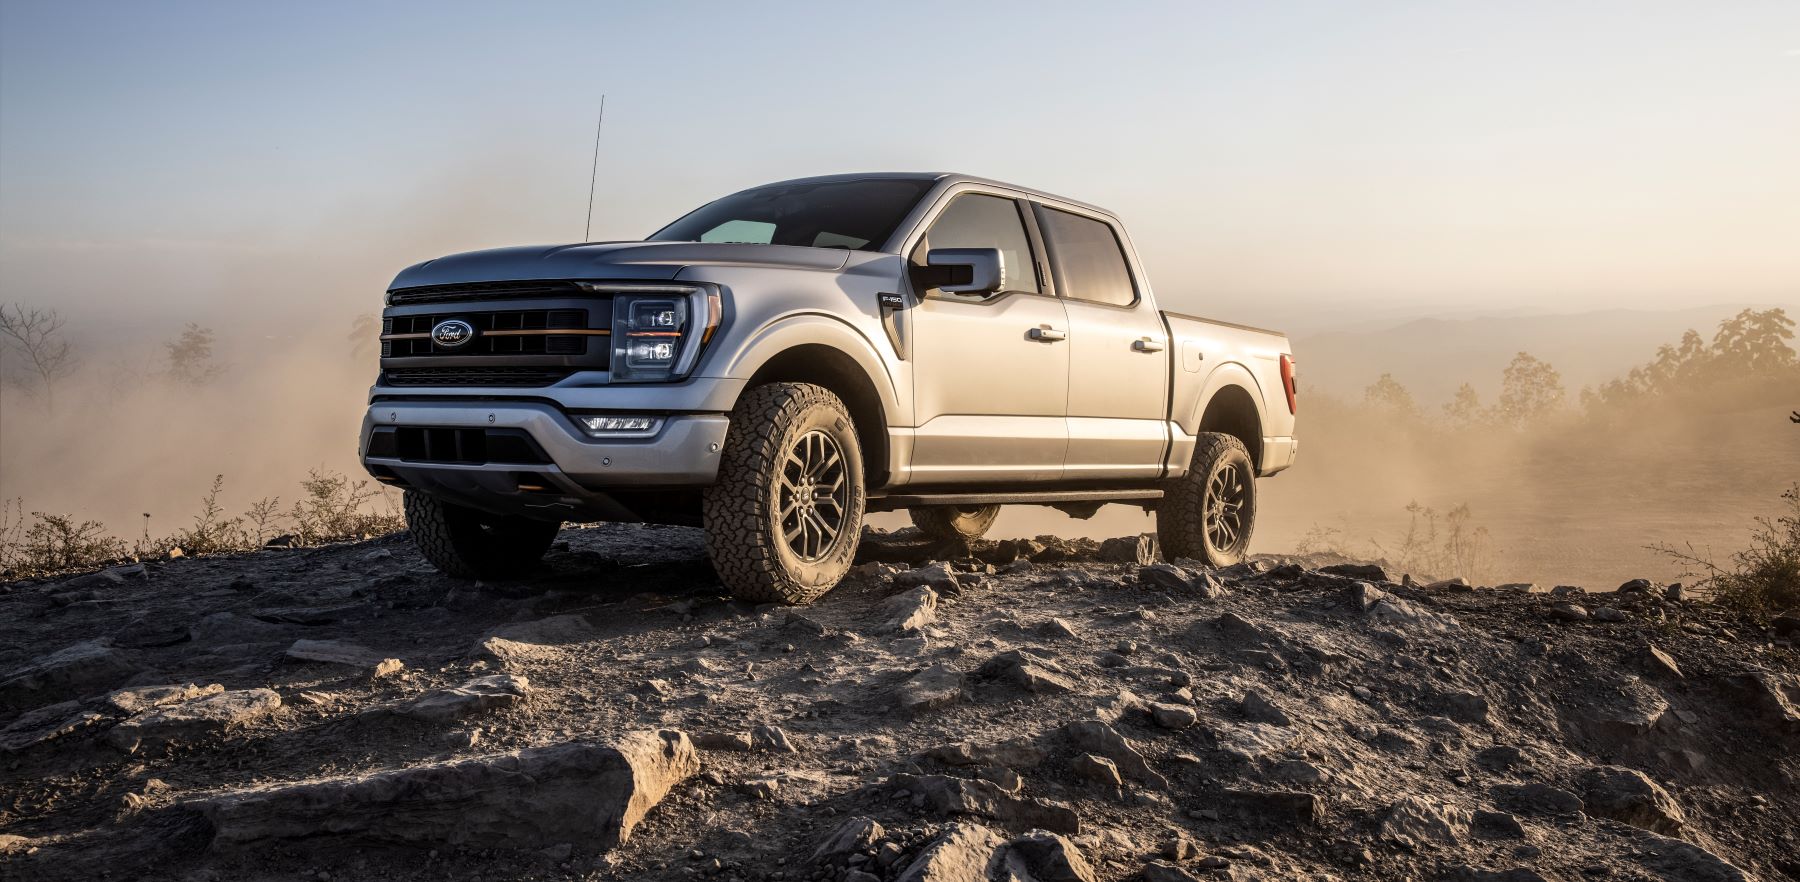 2021 Ford F-150 Tremor full-size pickup truck parked on a rocky mound surrounded by dust clouds